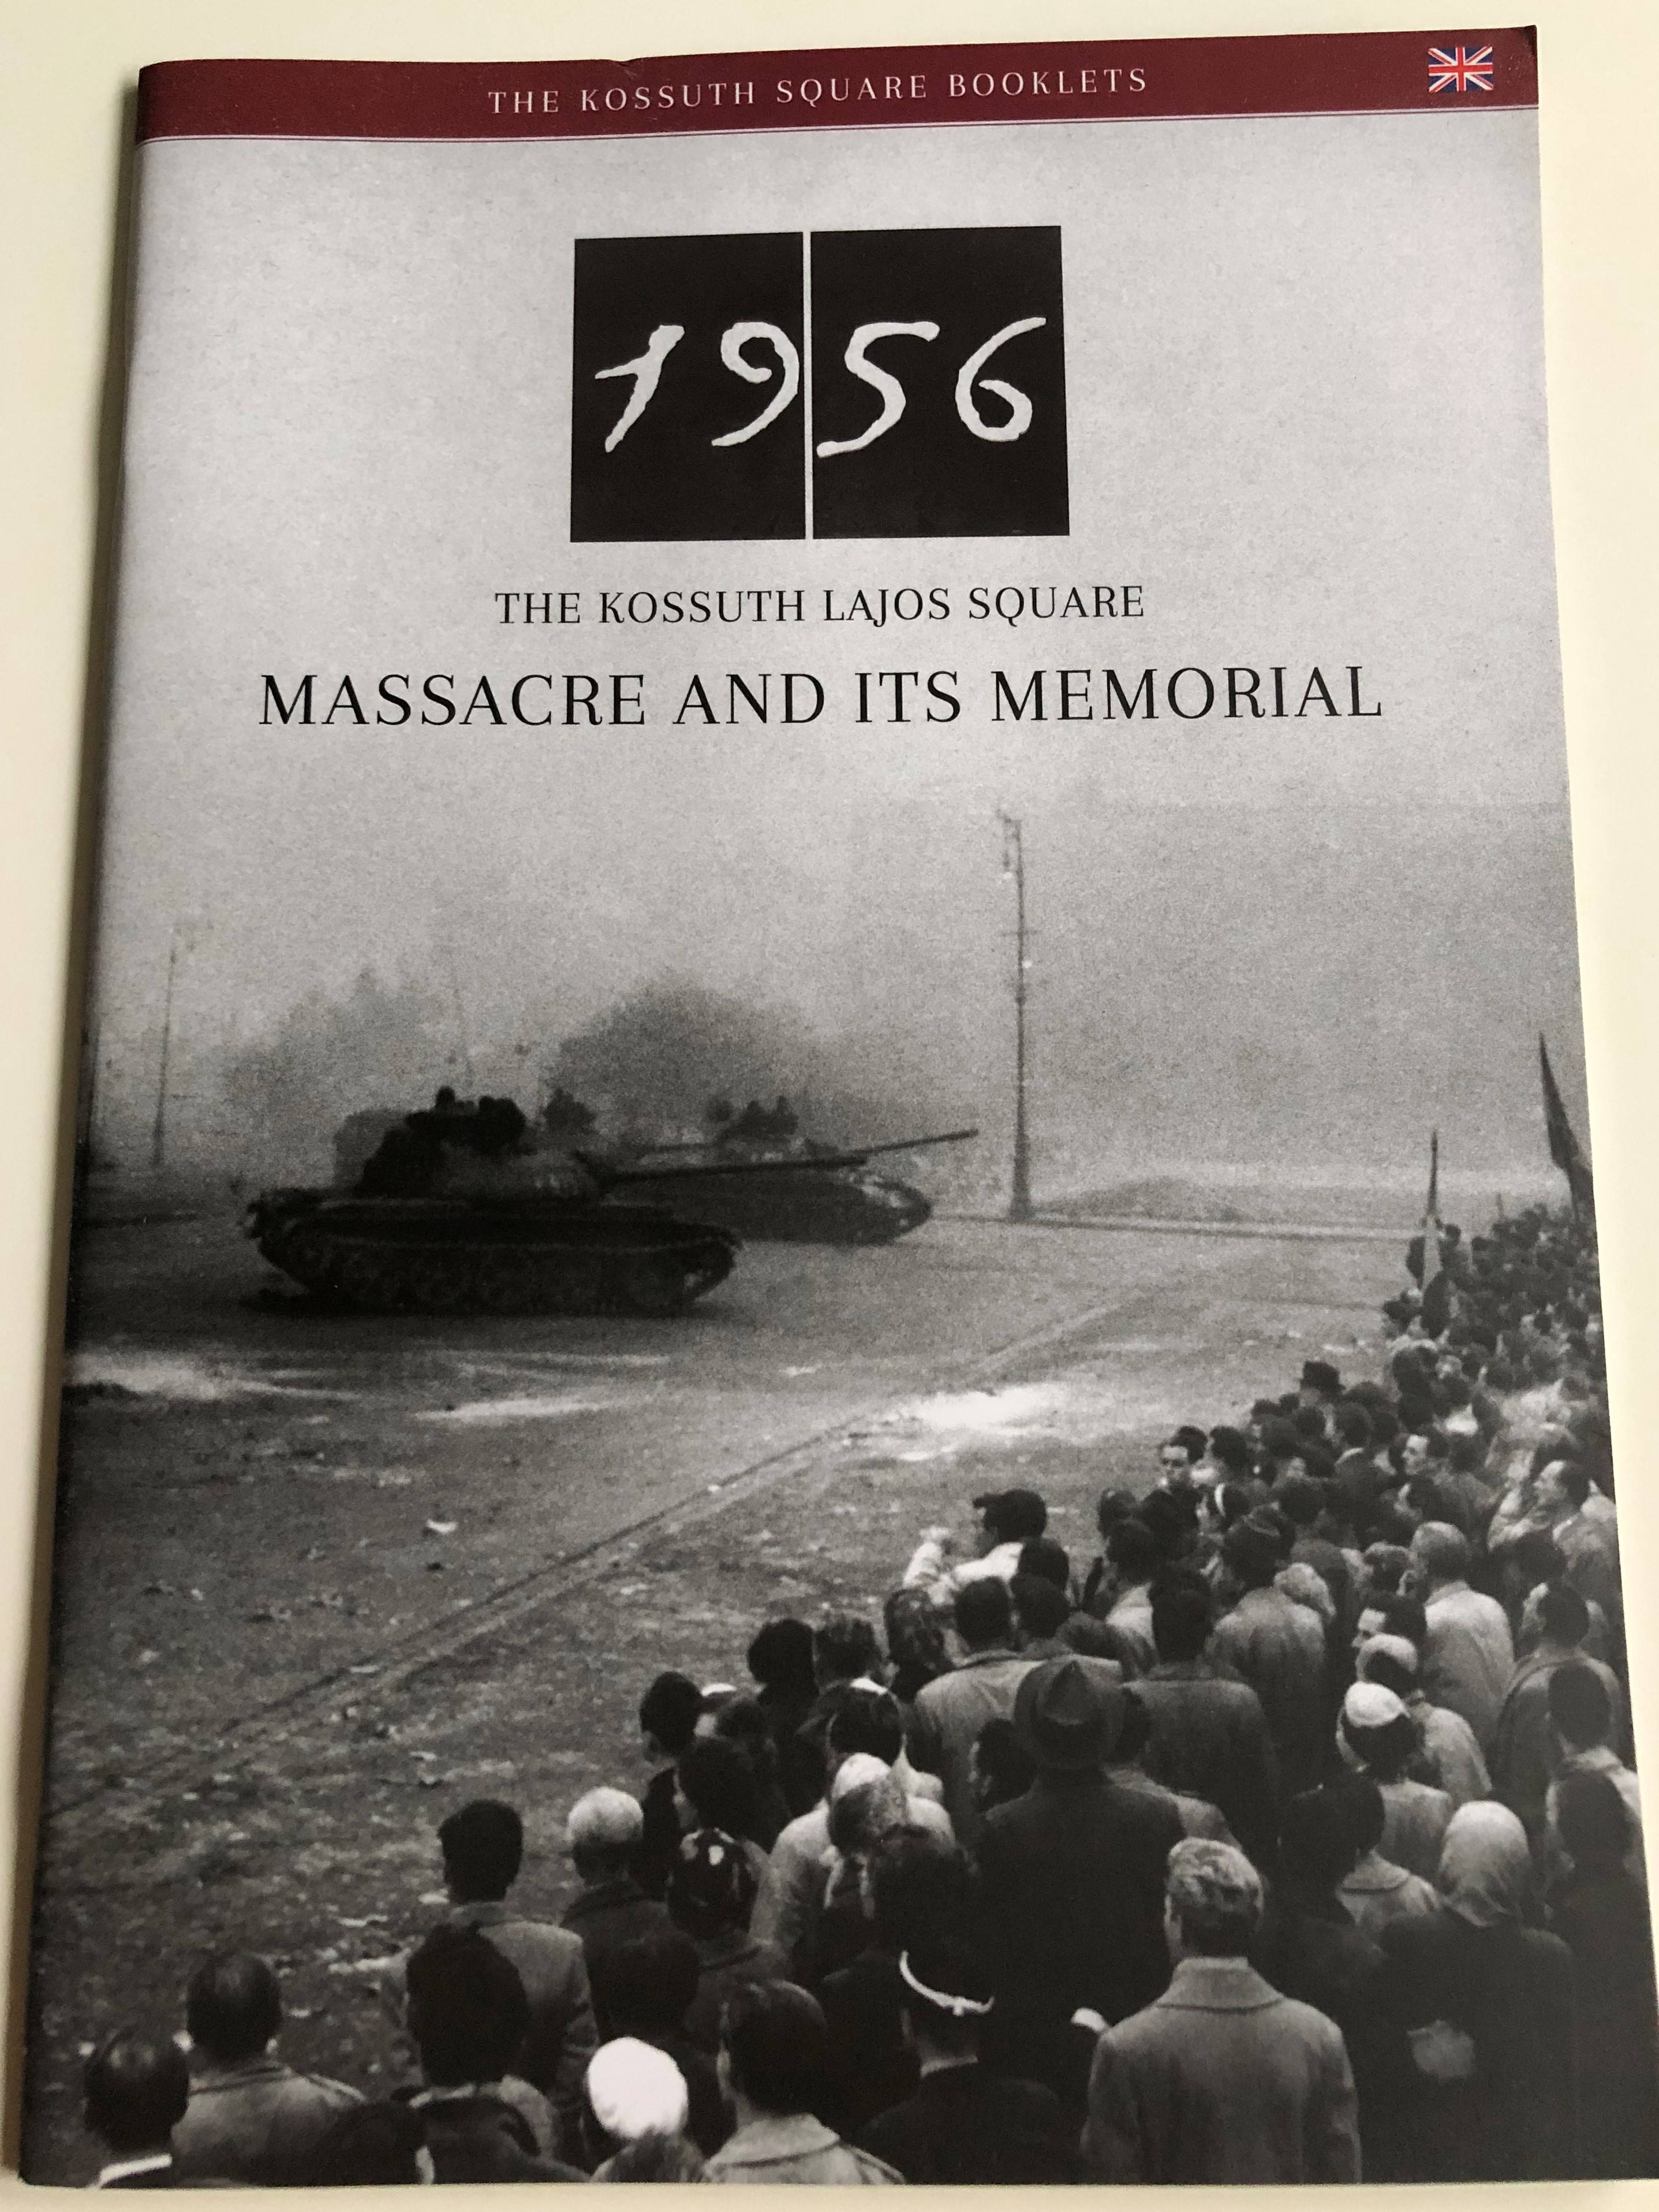 1956-the-kossuth-lajos-square-massacre-and-its-memorial-by-csaba-n-meth-the-kossuth-square-booklets-english-language-documentary-booklet-1-.jpg